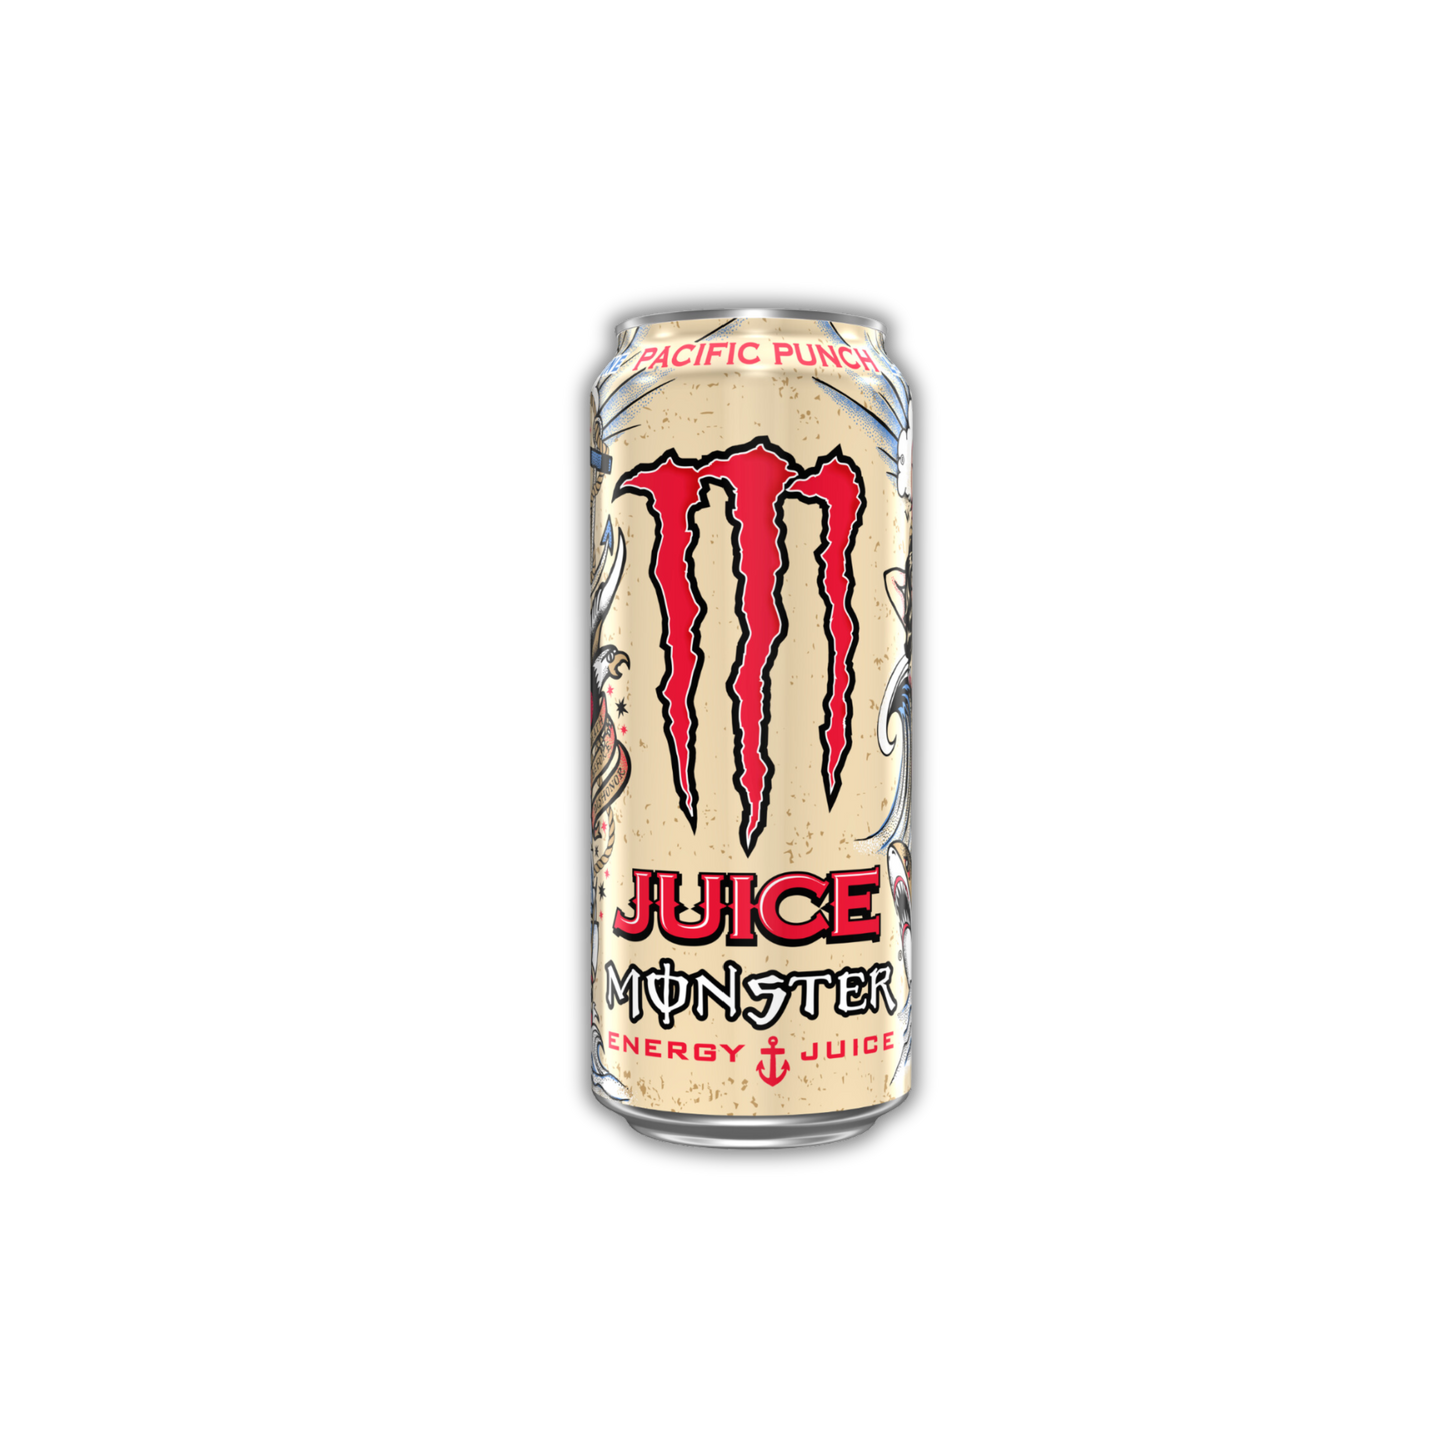 "American Monster Energy Drink Pacific Punch 473ml can - tropical fruity-flavored energy drink."